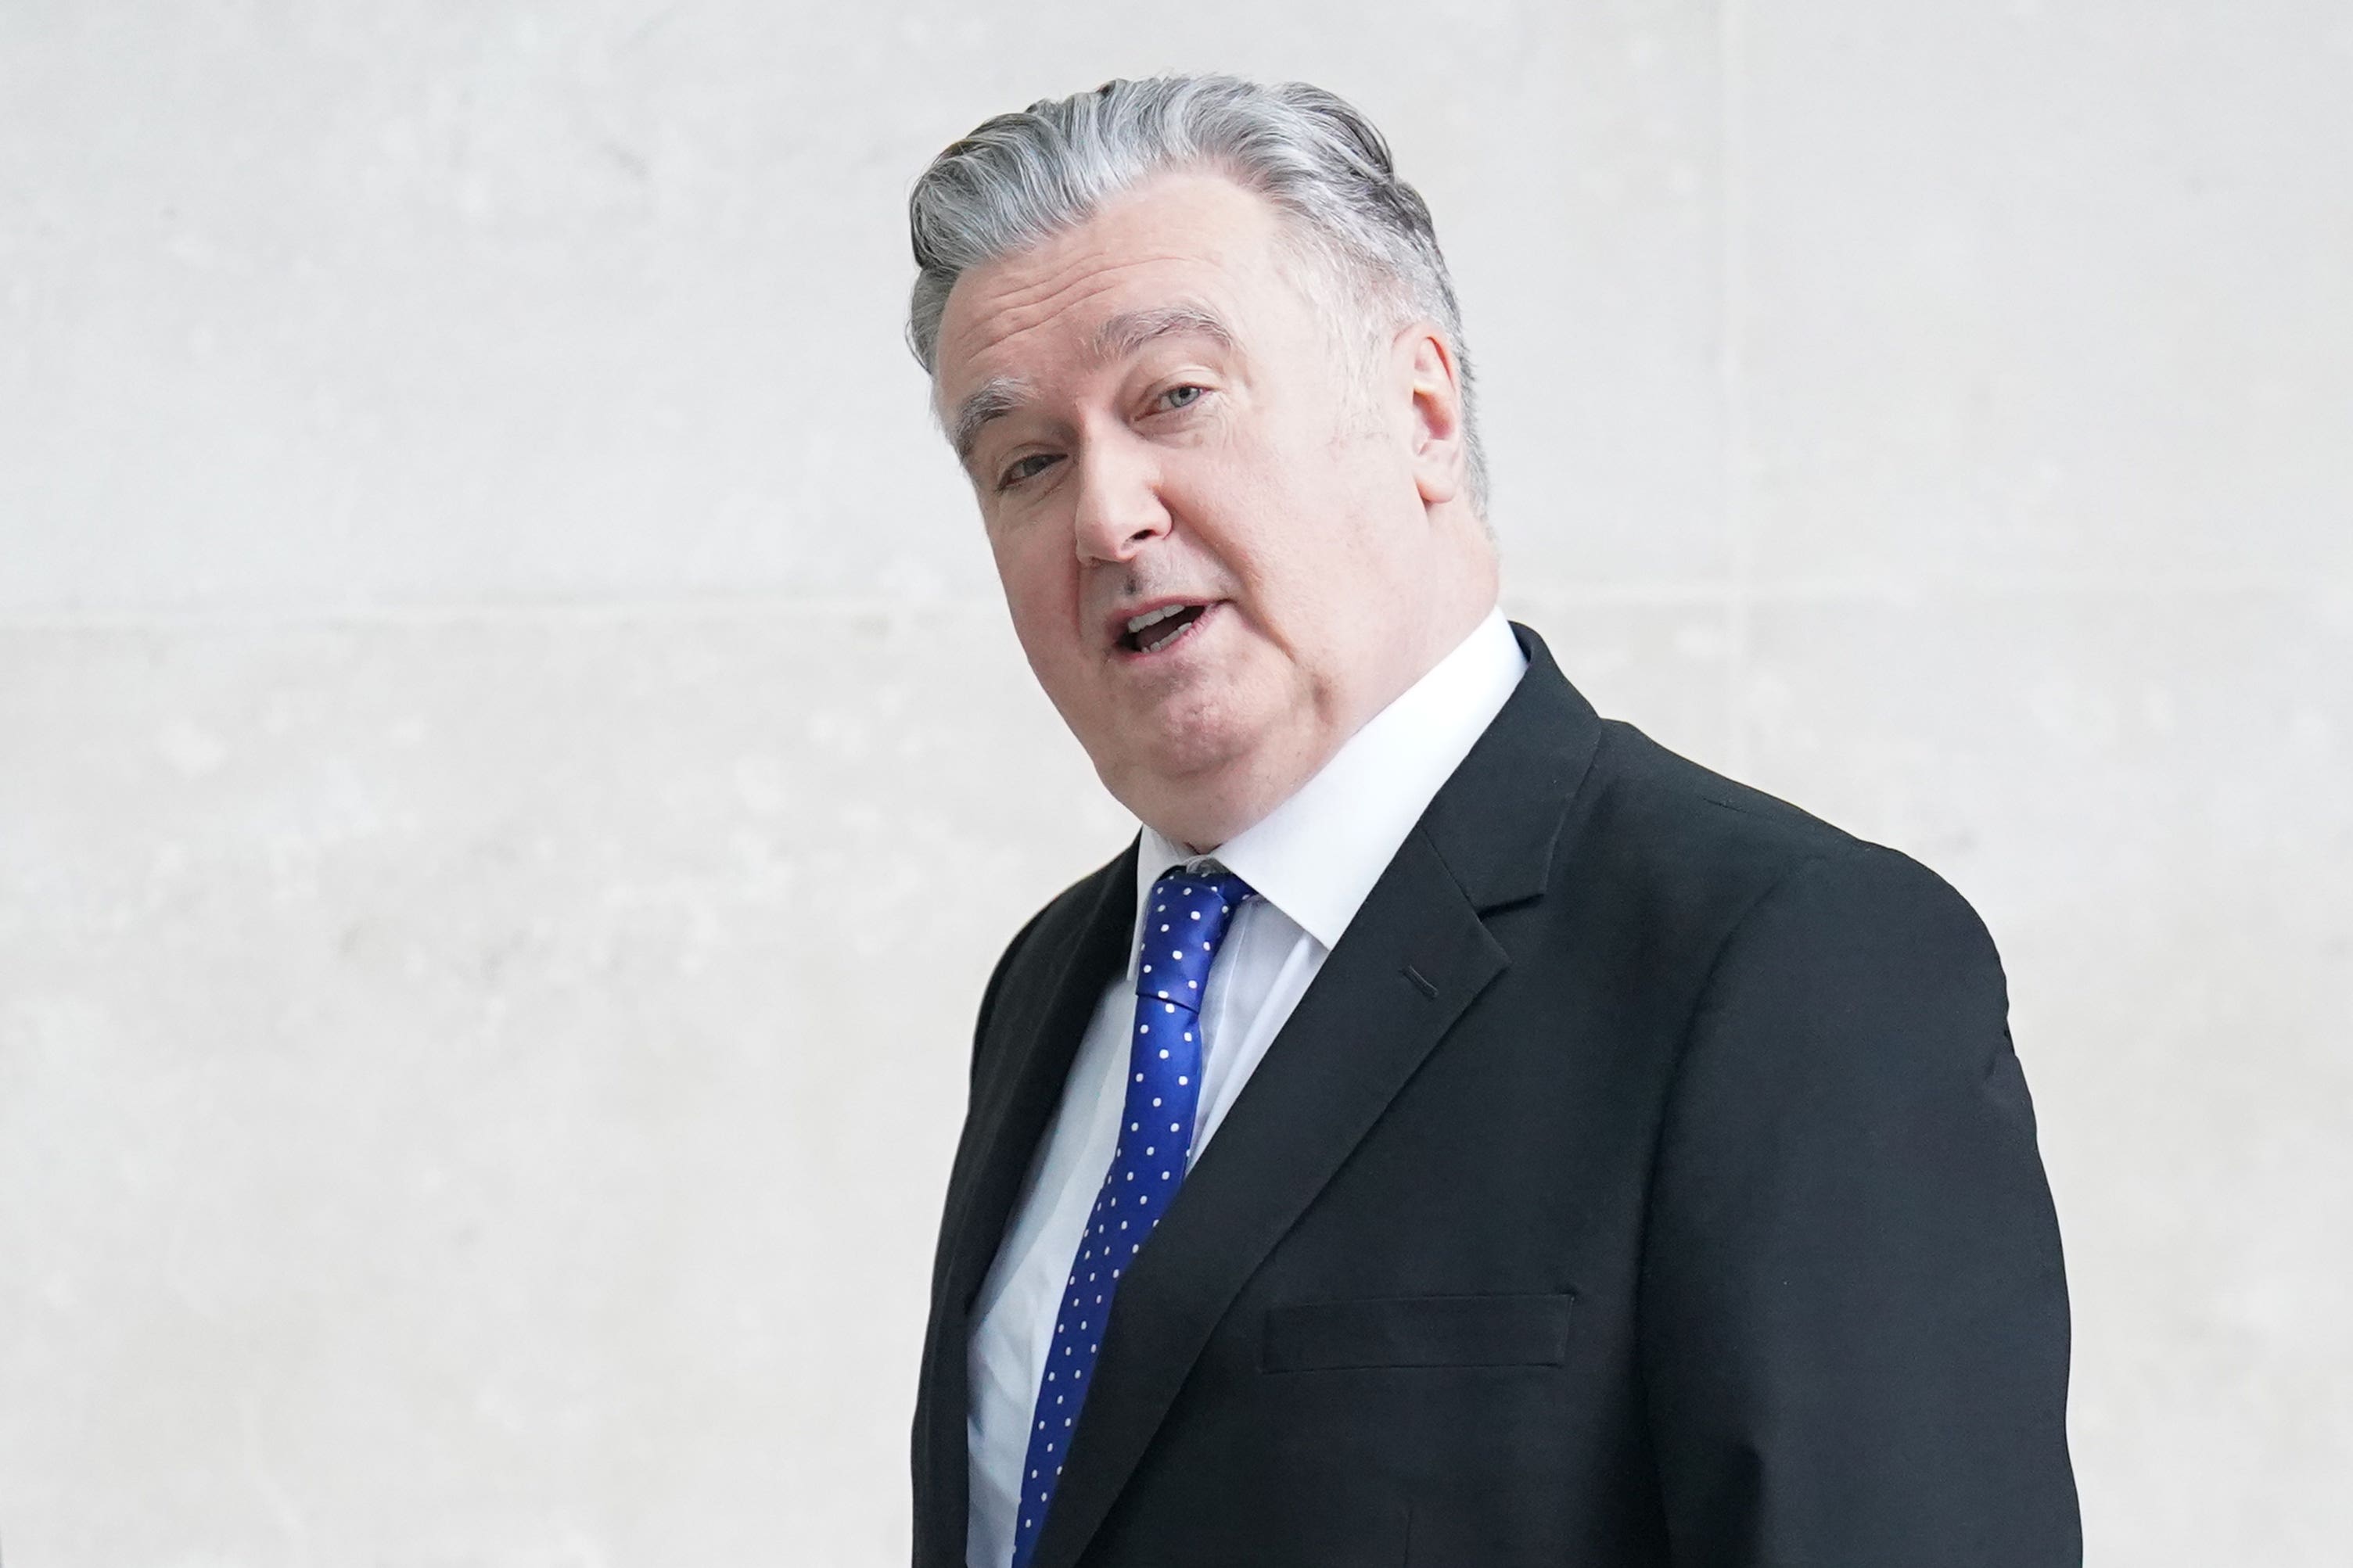 SNP MP John Nicolson has been cleared of bullying